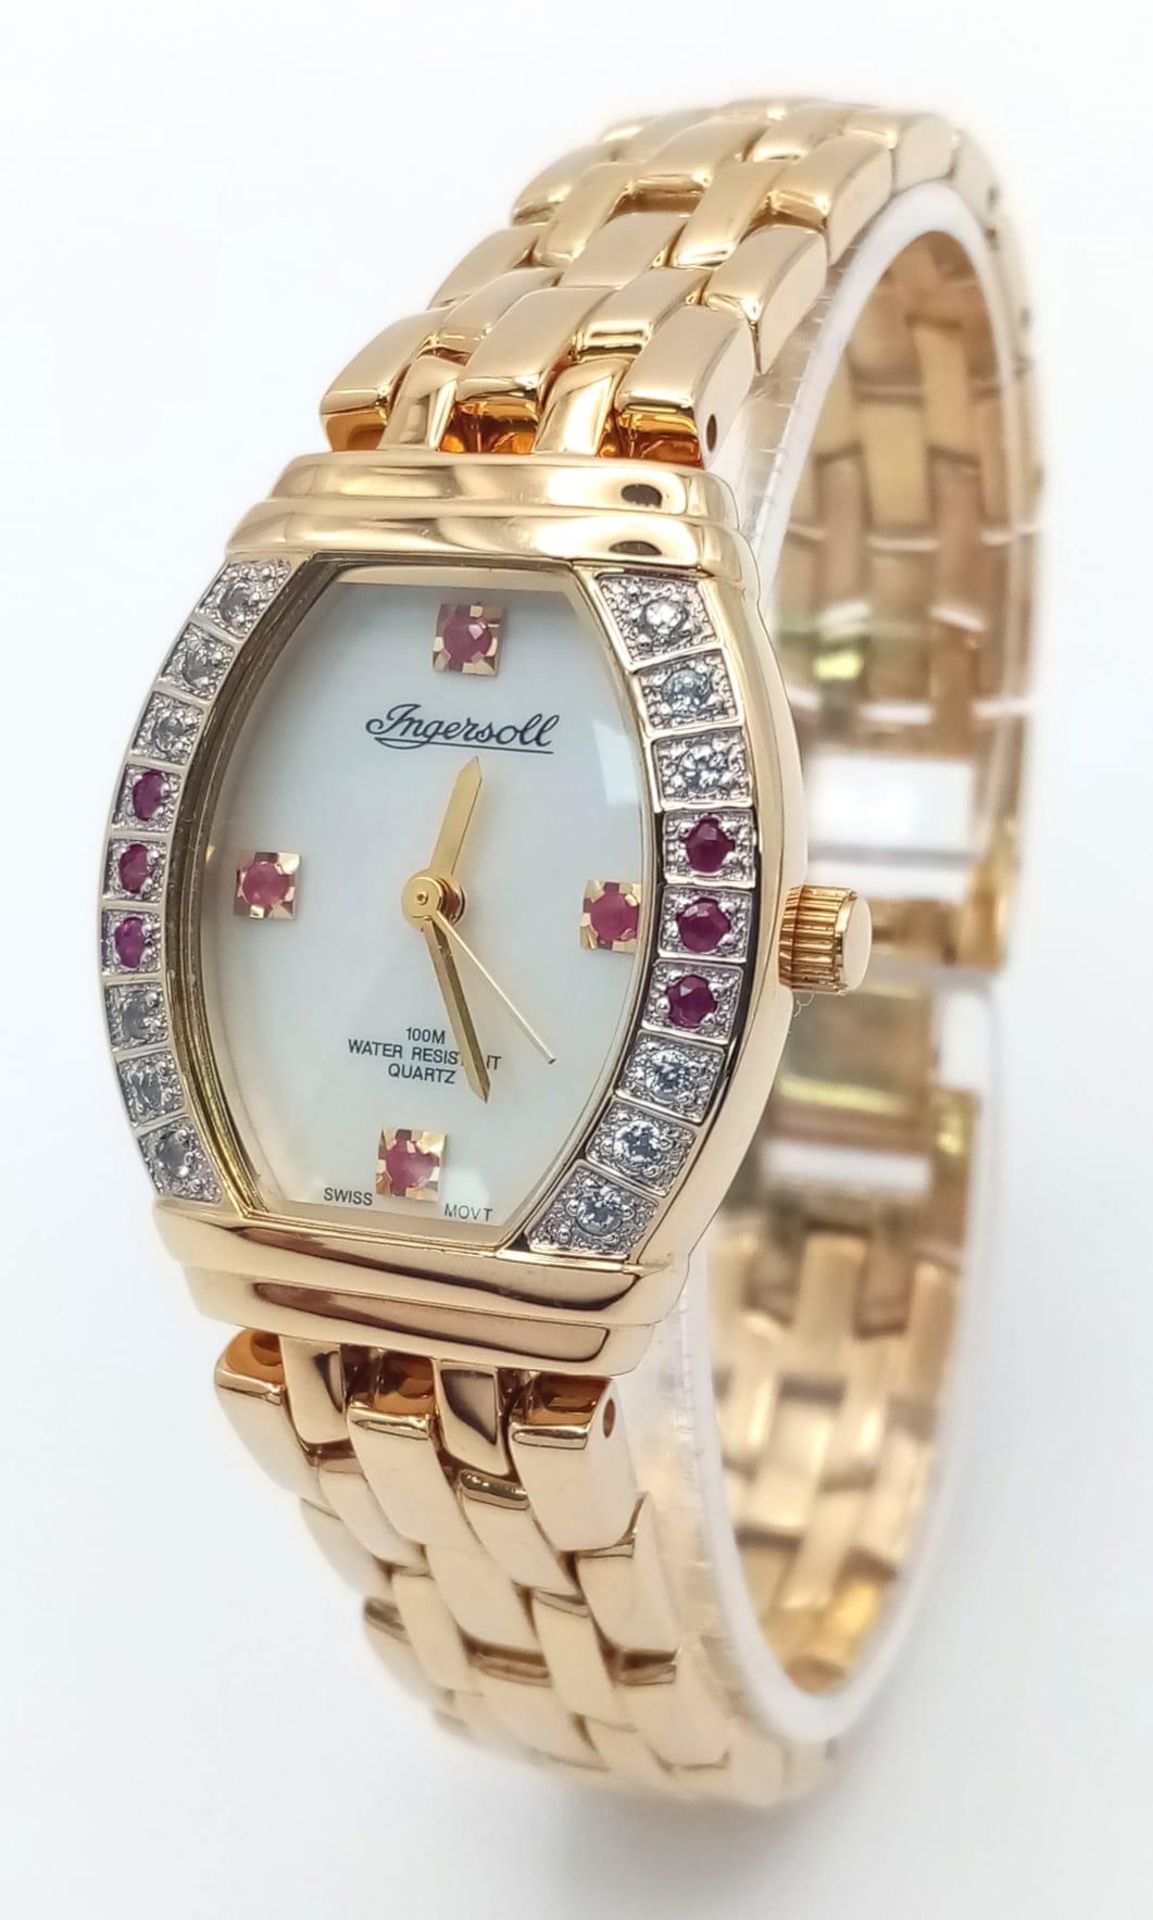 An Ingersoll Stone Set Quartz Ladies Watch. Gold plated bracelet and case - 25mm. White dial with